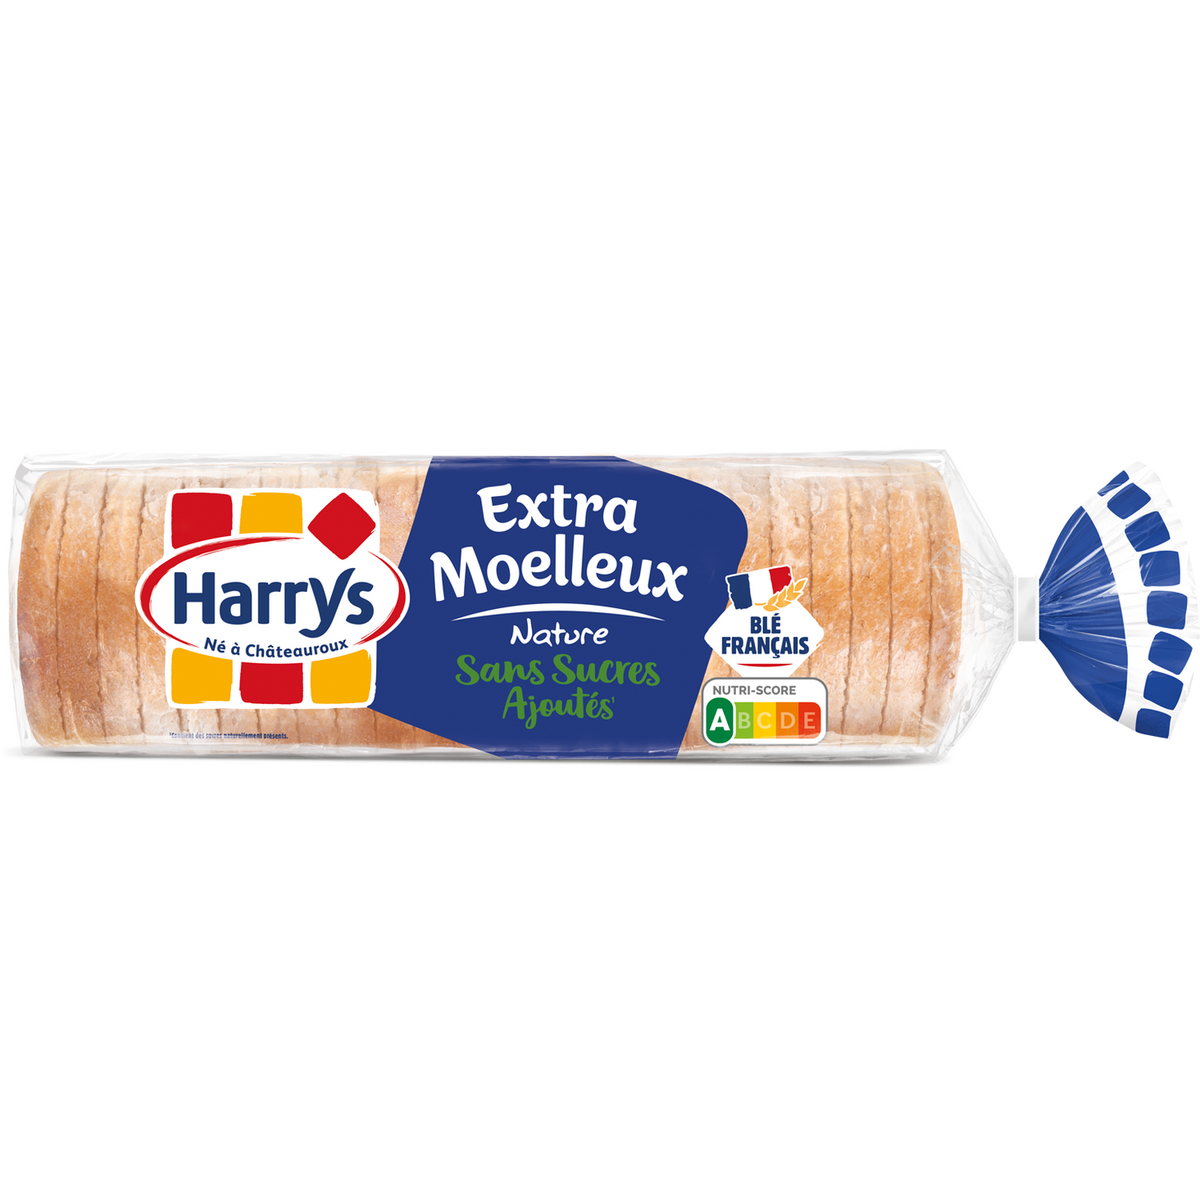 EXTRA MOELLEUX COMPLET HARRYS